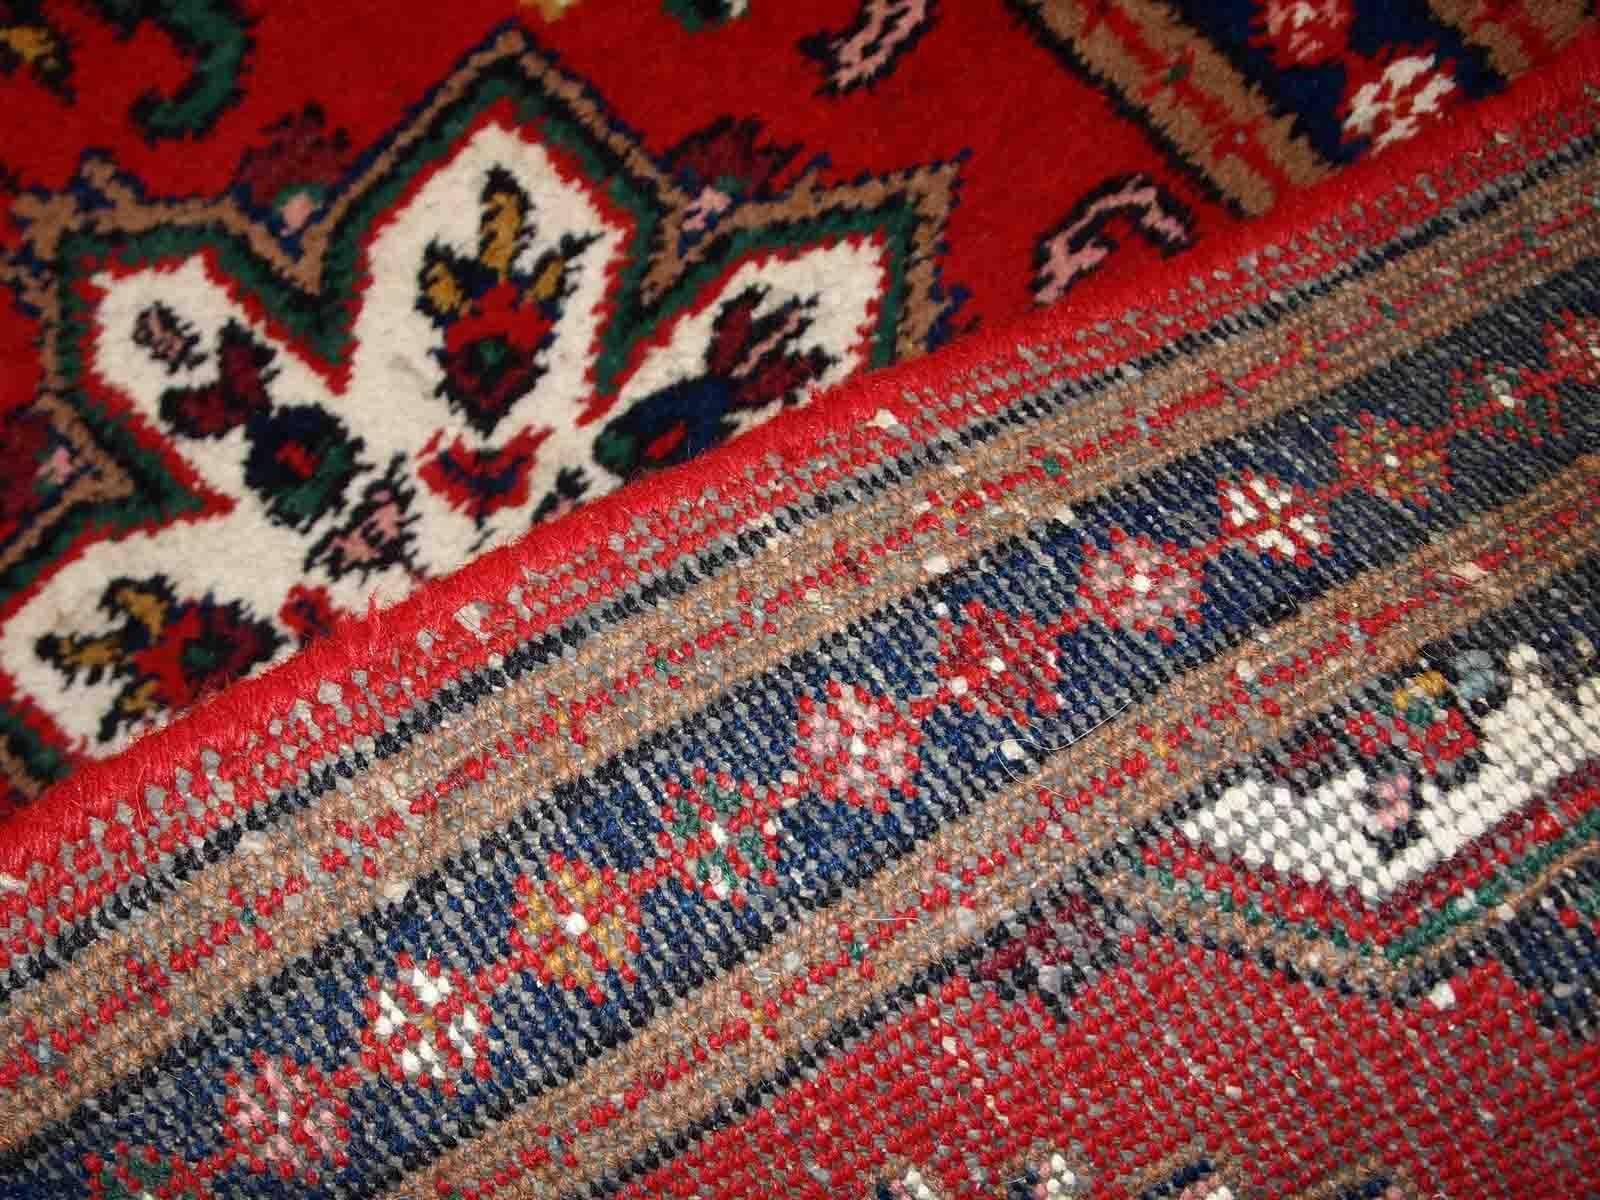 Handmade vintage Middle Eastern rug in traditional floral design. The rug is from the end of 20th century in original good condition.

-Condition: origial good, 

-circa: 1970s,

-Size: 2.2' x 4.4' (70cm x 136cm),
?
-Material: